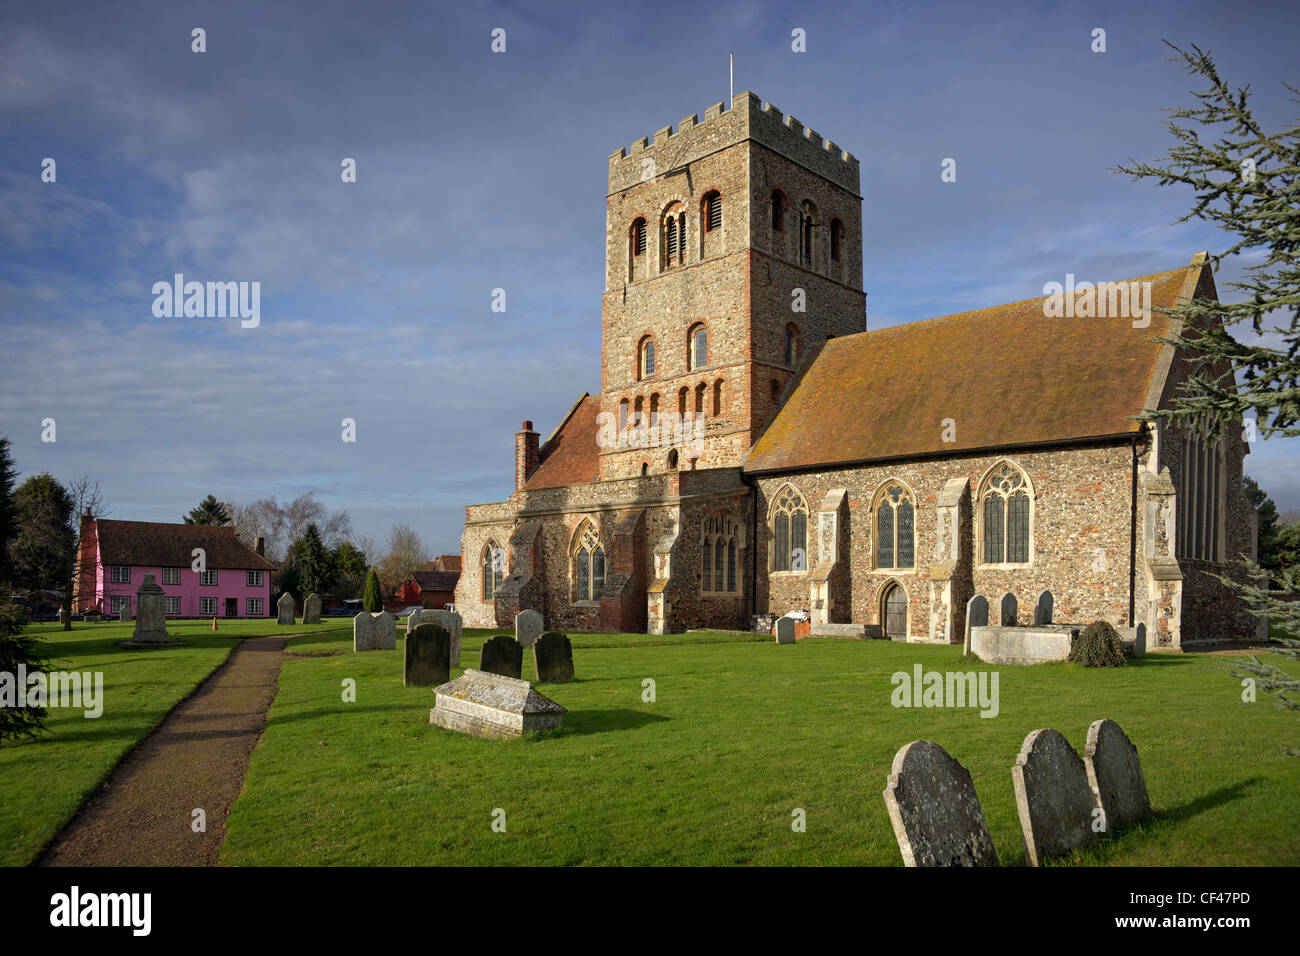 Exterior of St Barnabas church in Great Tey. Stock Photo